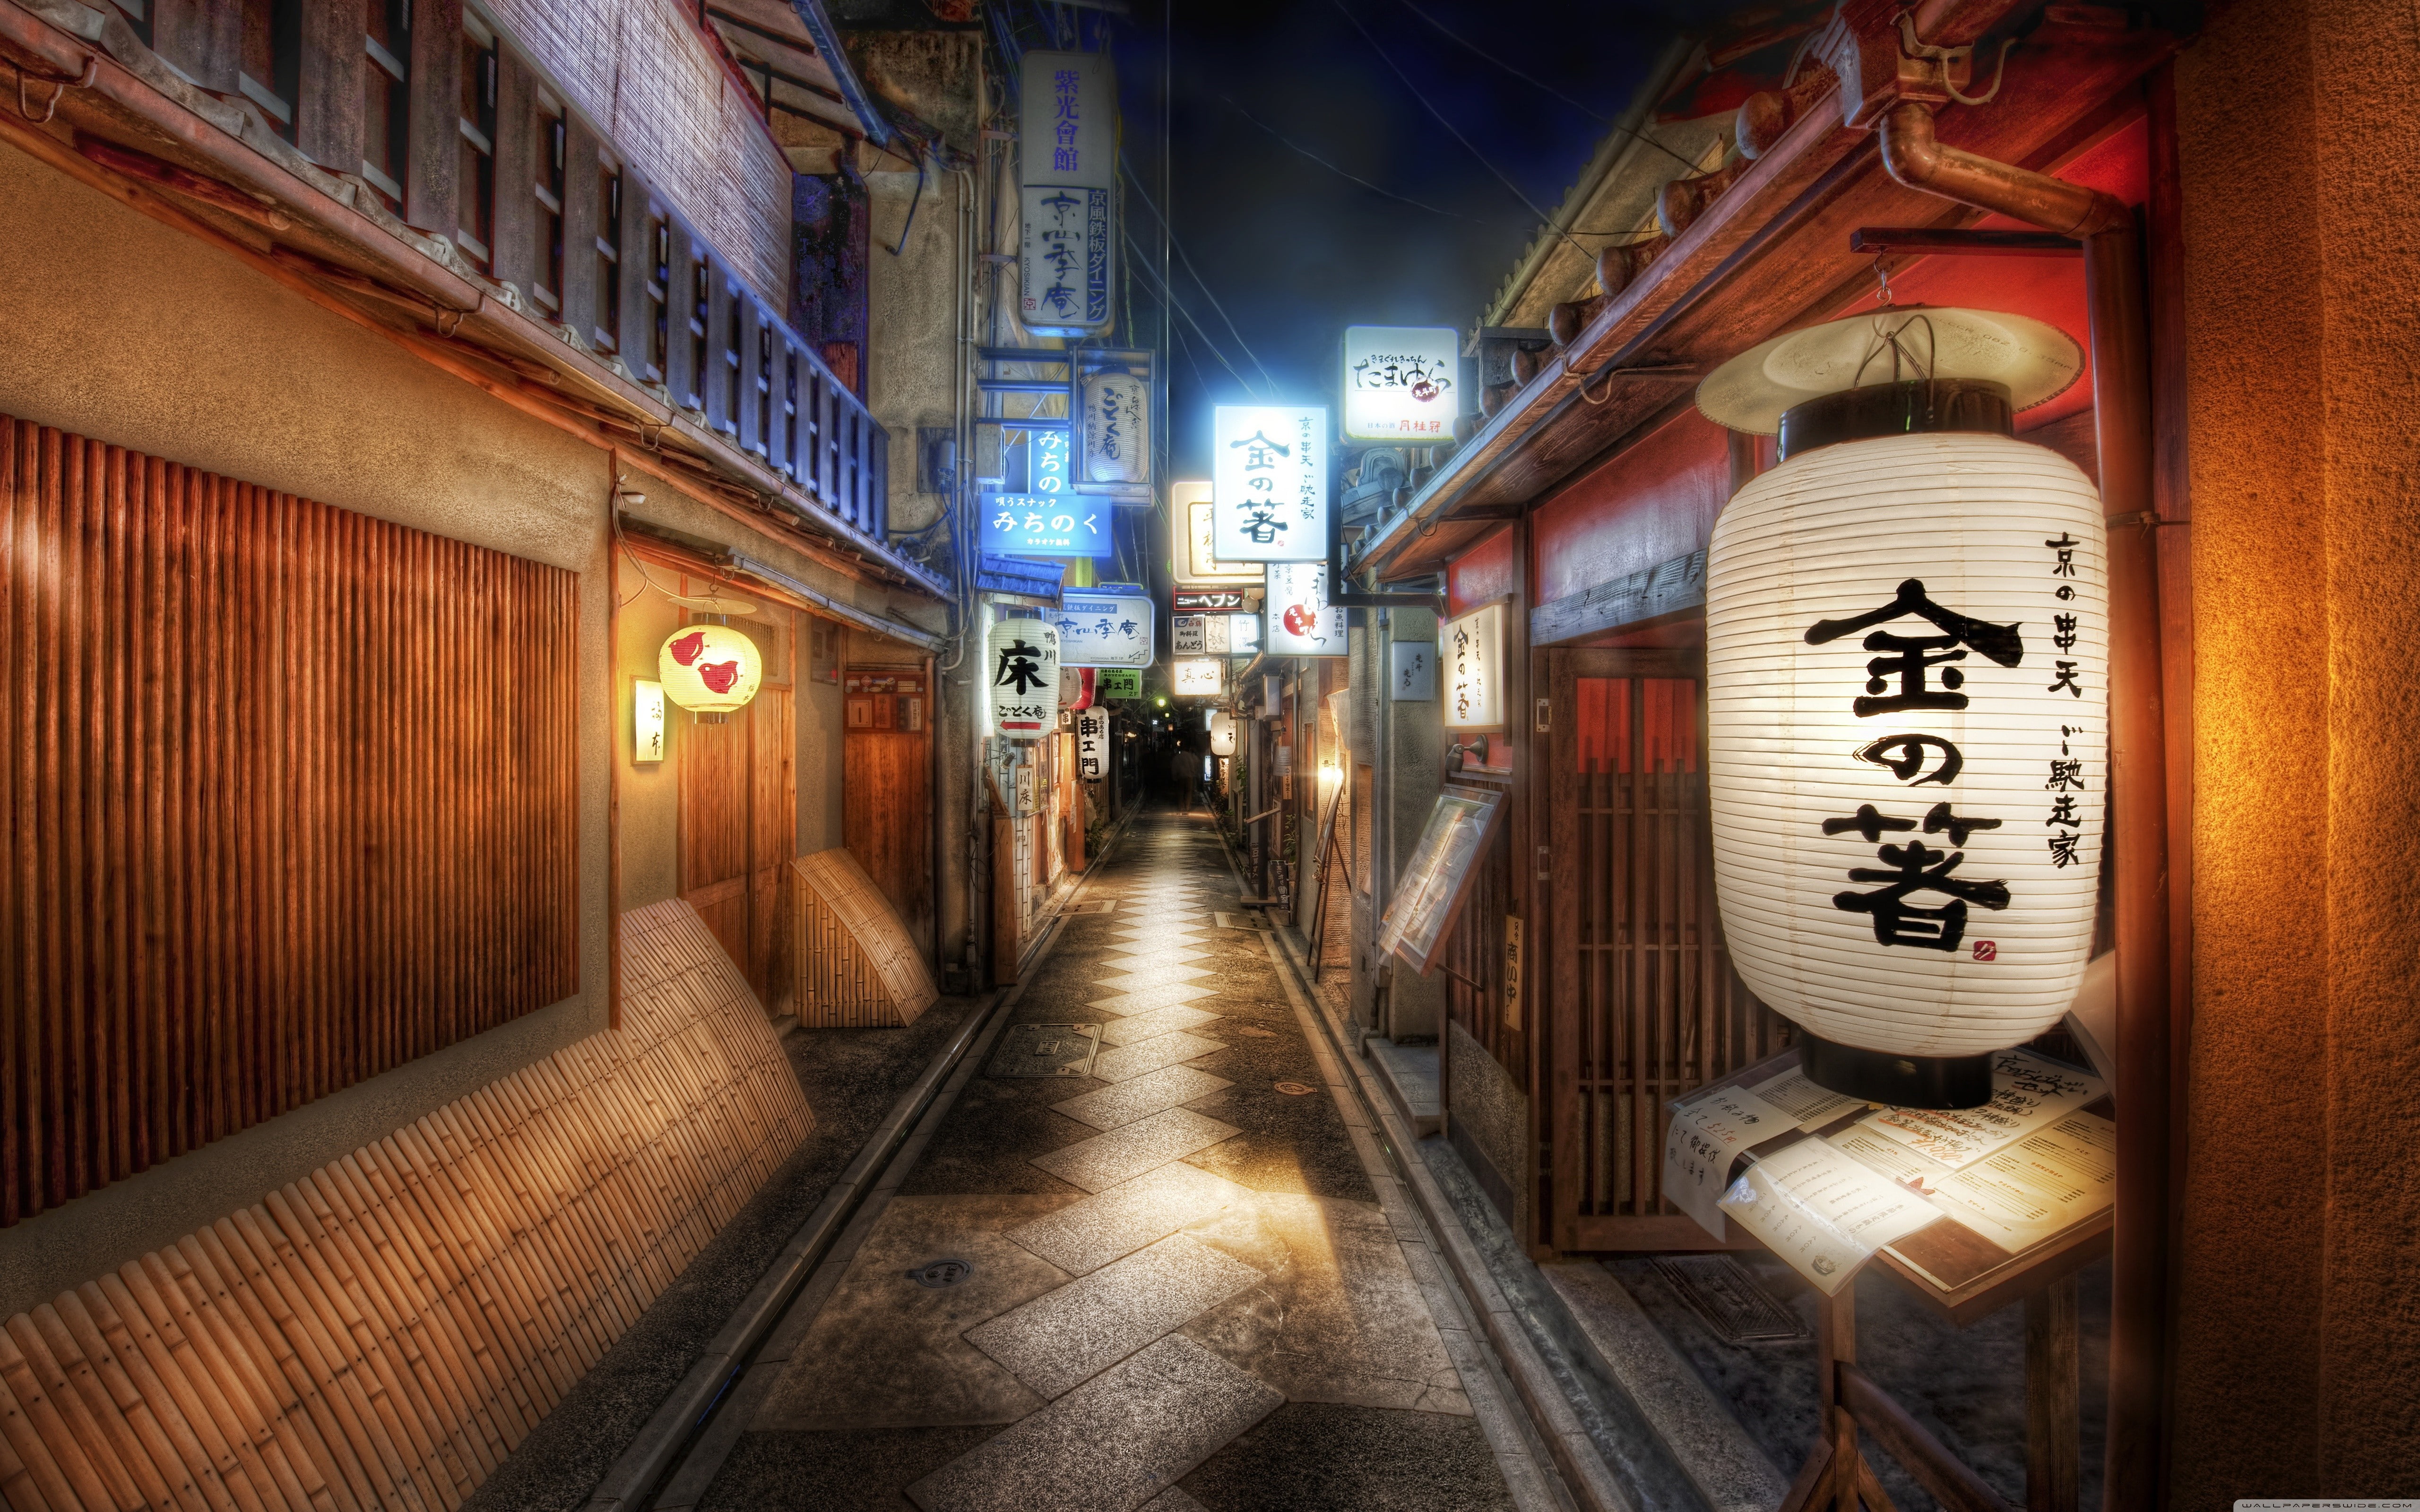 cityscape anime architecture building japanese hdr night lights bamboo clouds japan city street